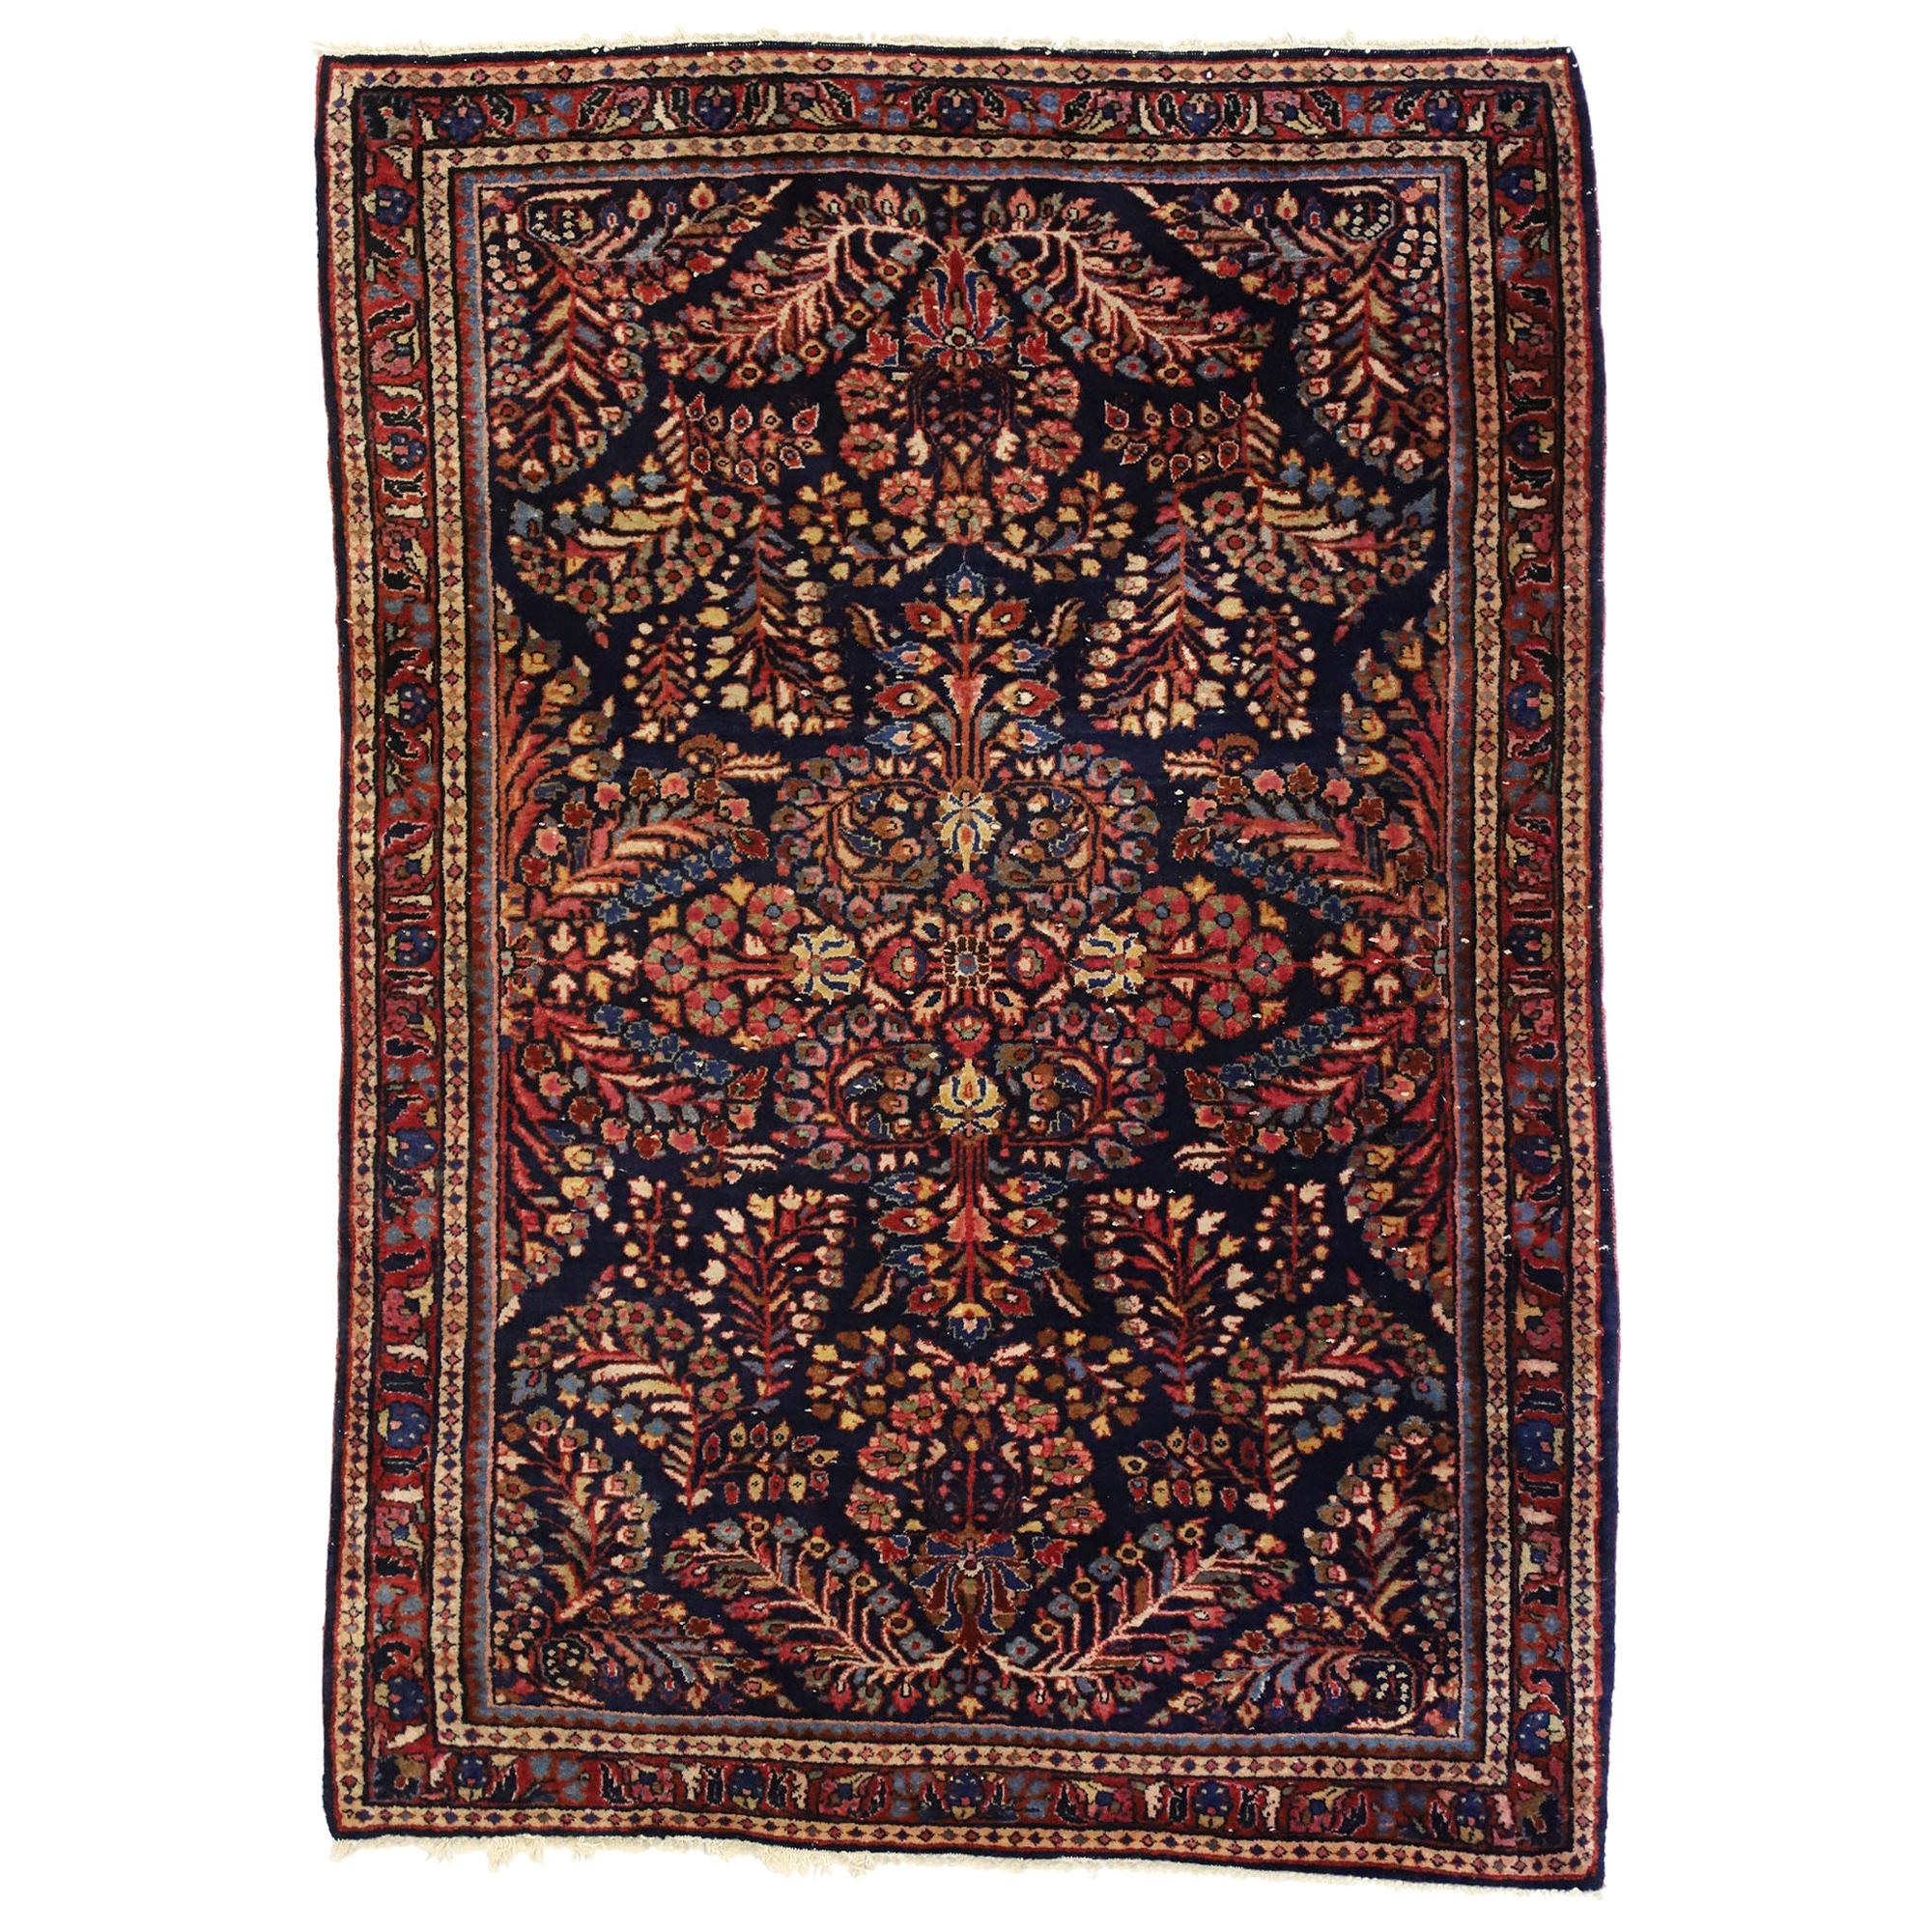 Antique Persian Sarouk Rug with Luxe Victorian Style, Scatter Rug